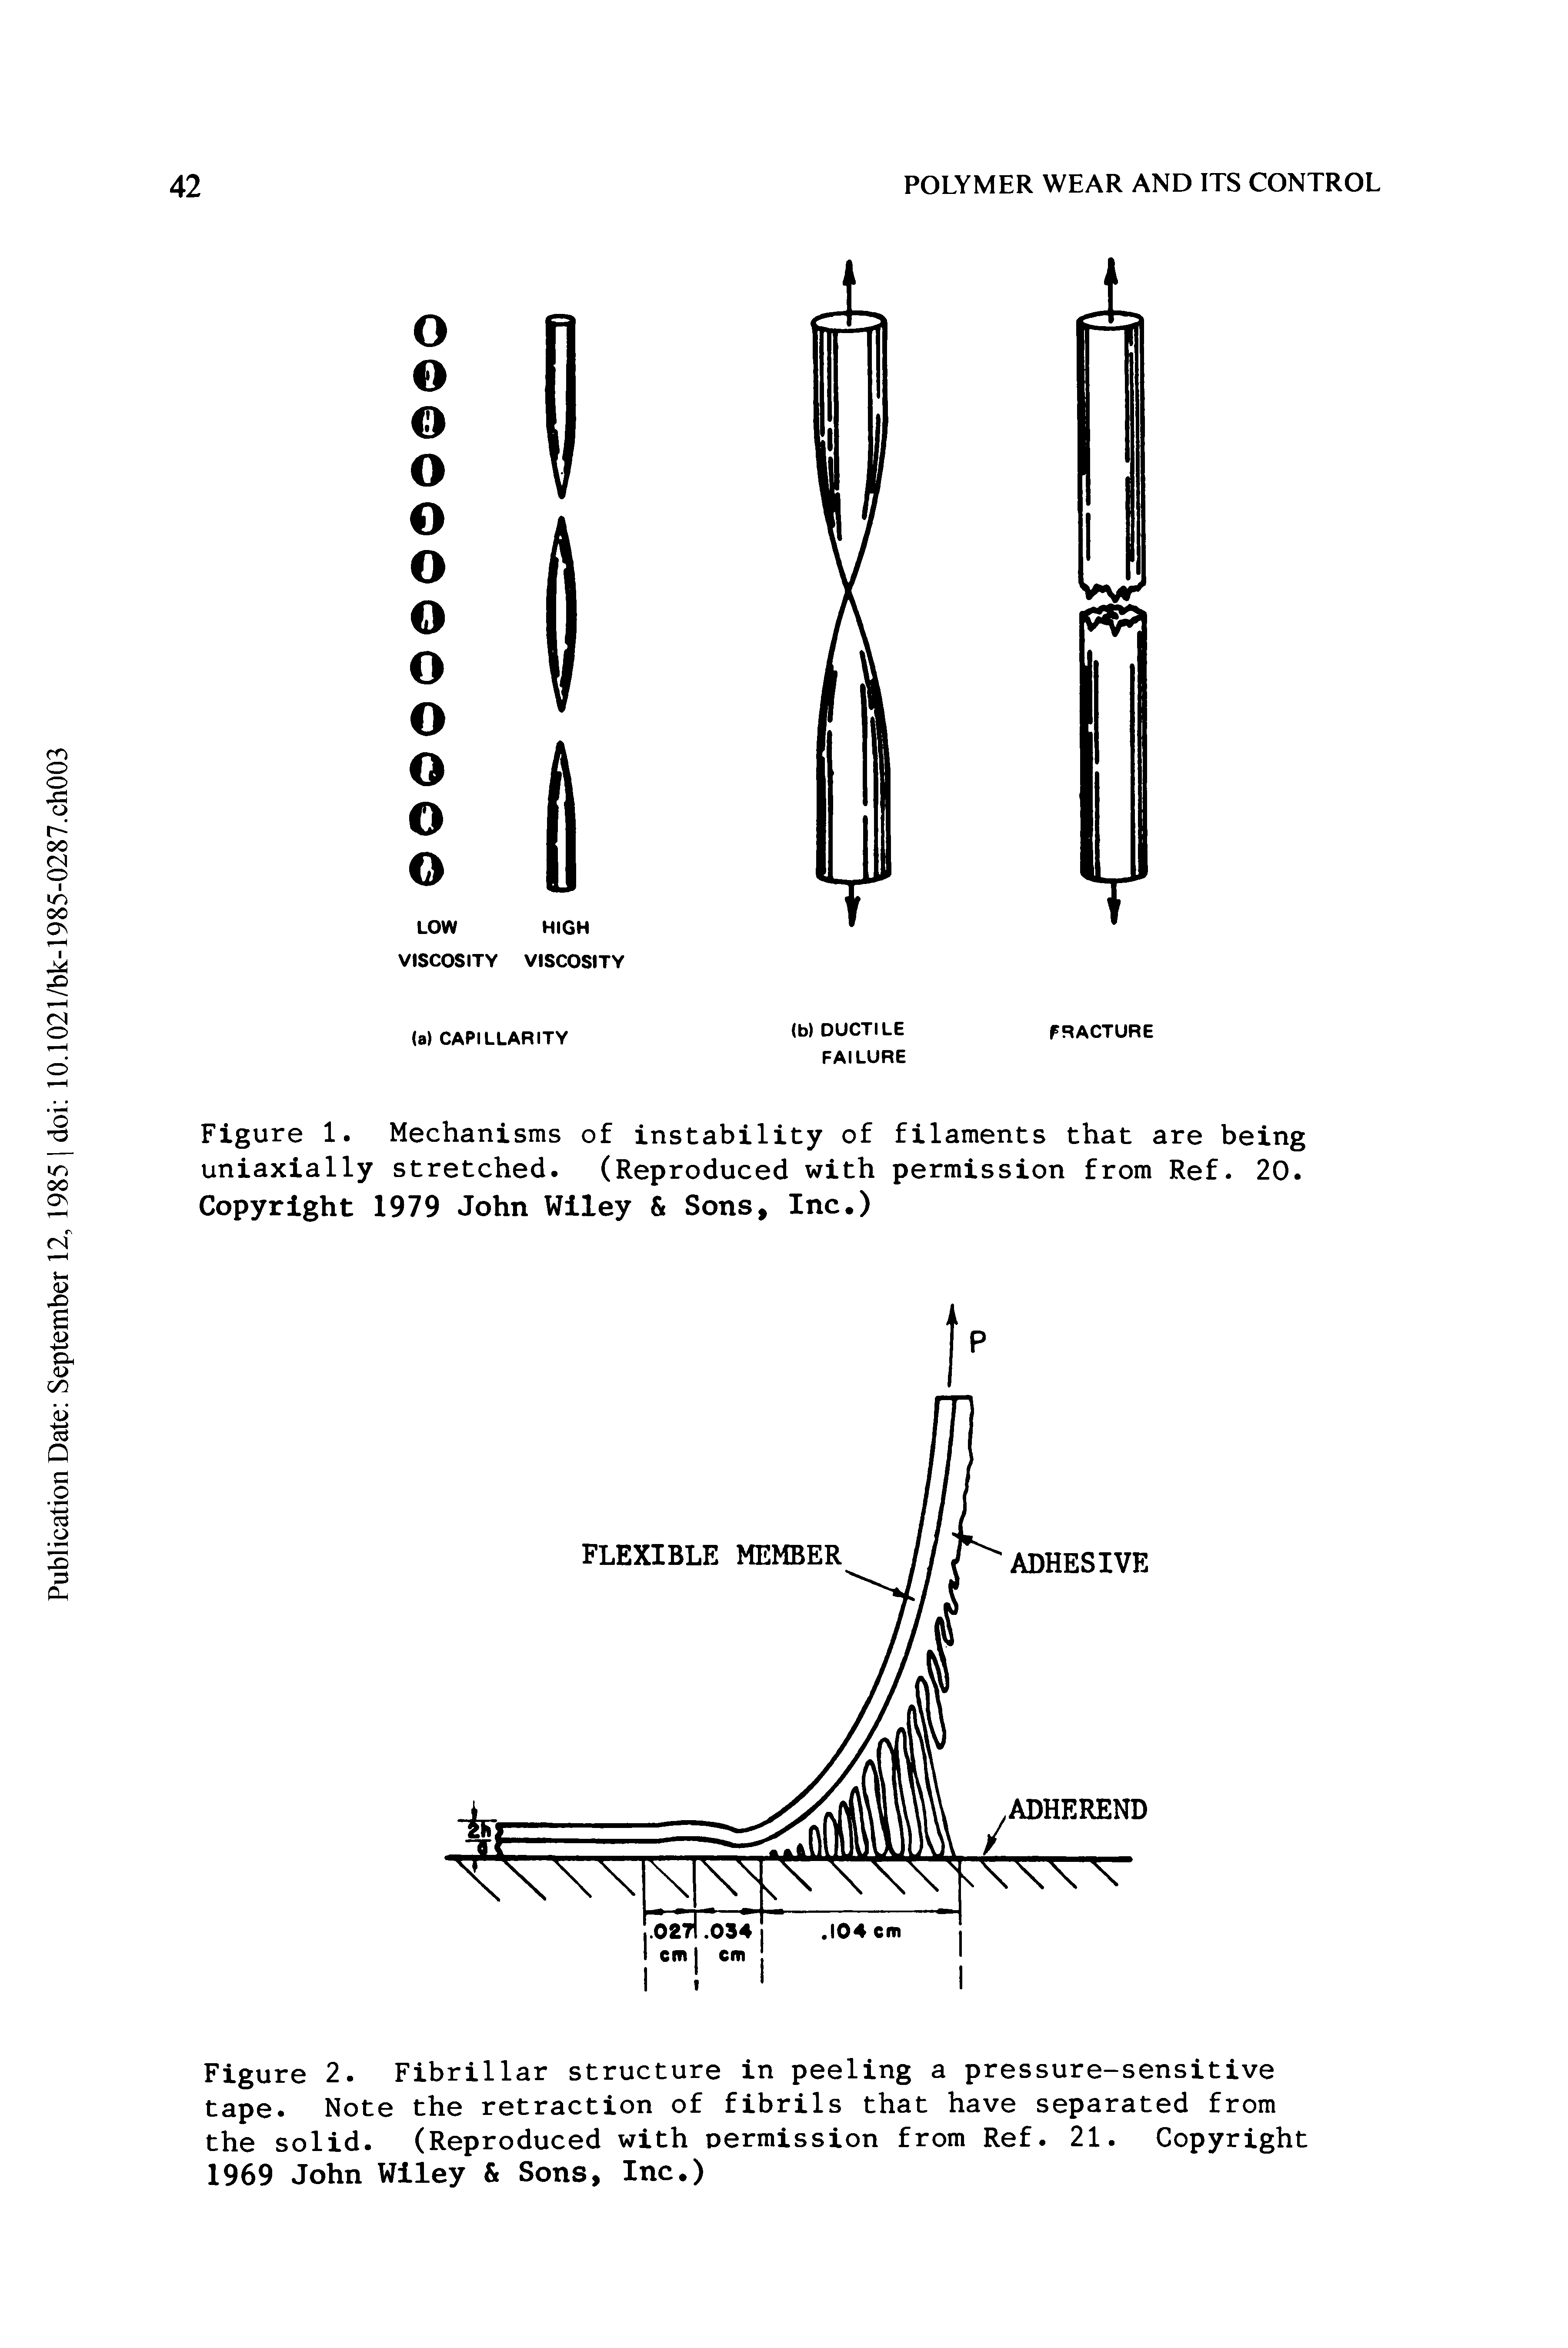 Figure 2. Fibrillar structure in peeling a pressure-sensitive tape. Note the retraction of fibrils that have separated from the solid. (Reproduced with permission from Ref. 21. Copyright 1969 John Wiley Sons, Inc.)...